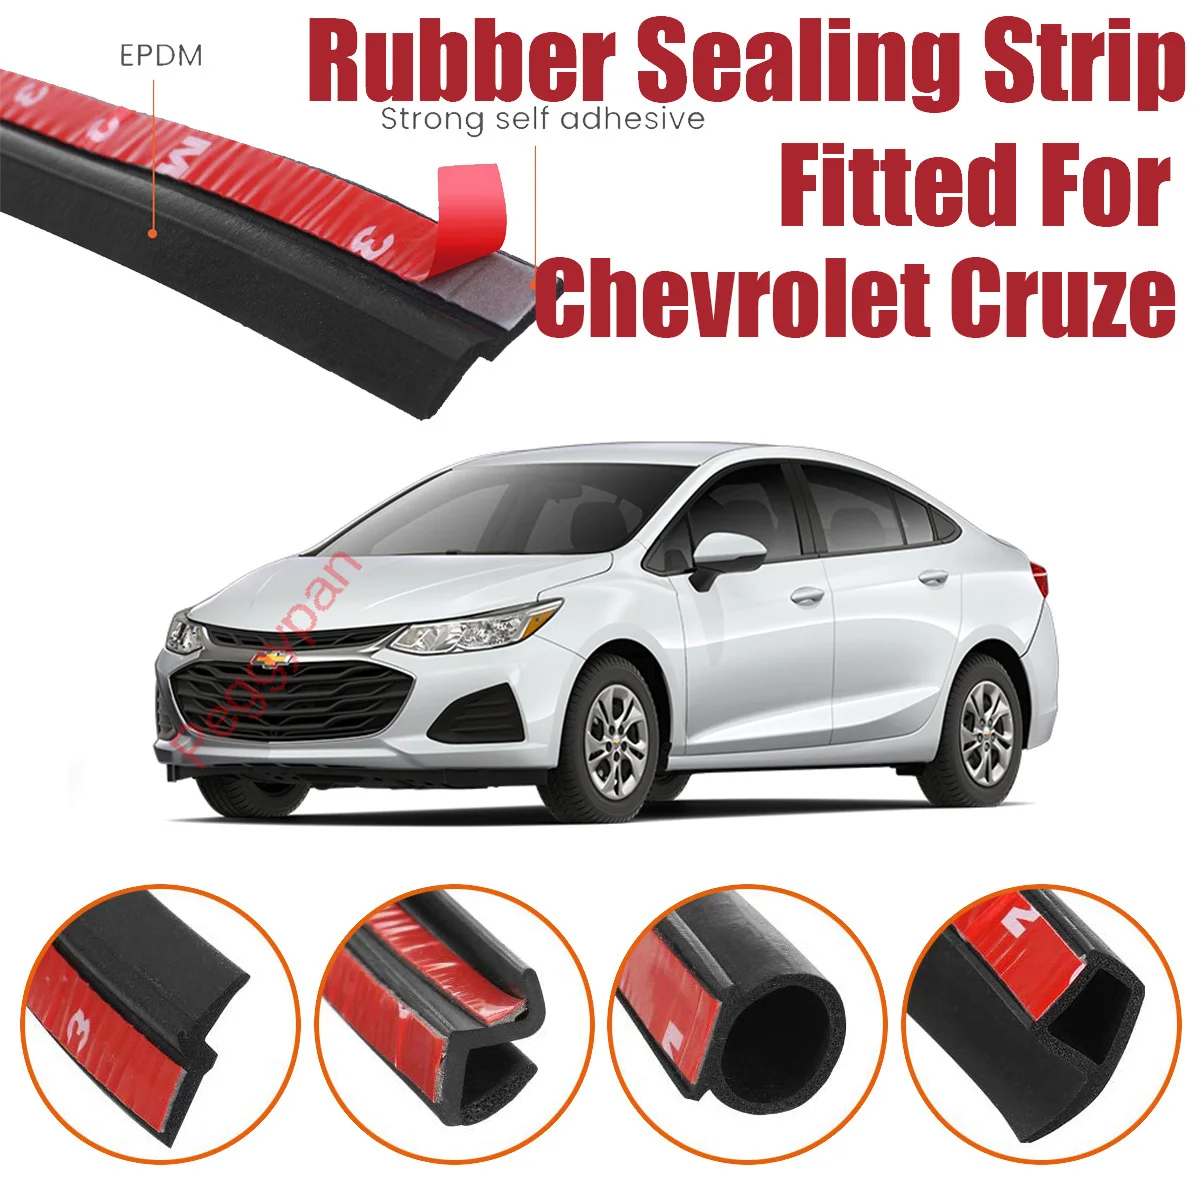 door-seal-strip-kit-self-adhesive-window-engine-cover-soundproof-rubber-weather-draft-wind-noise-reduction-for-chevrolet-cruze